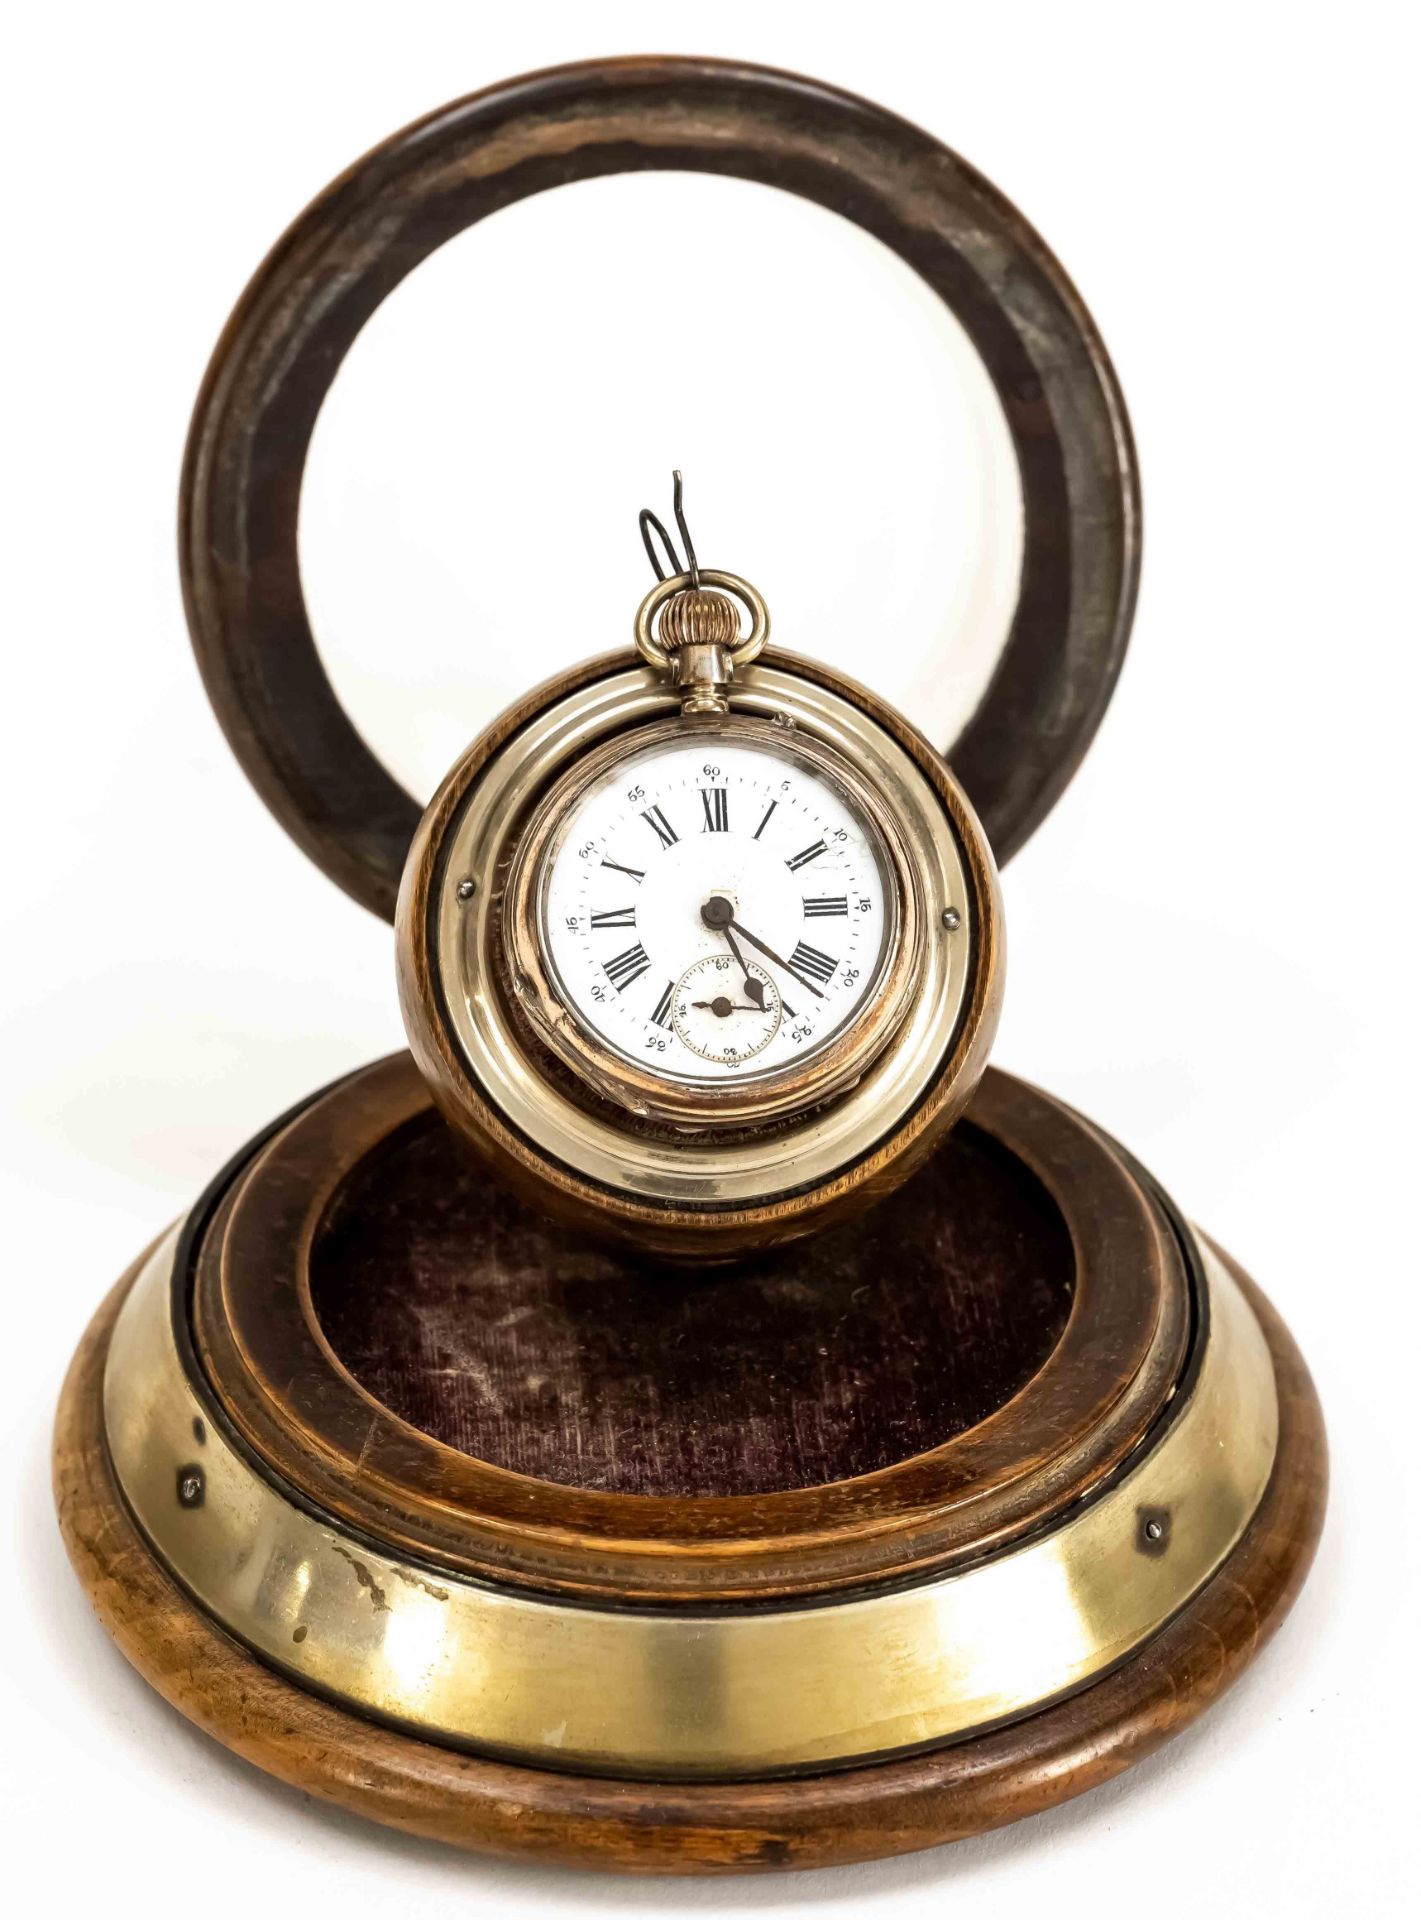 Pocket watch stand wood with glass dome and brass rim, wooden rim cracked at the back, men's - Image 2 of 2